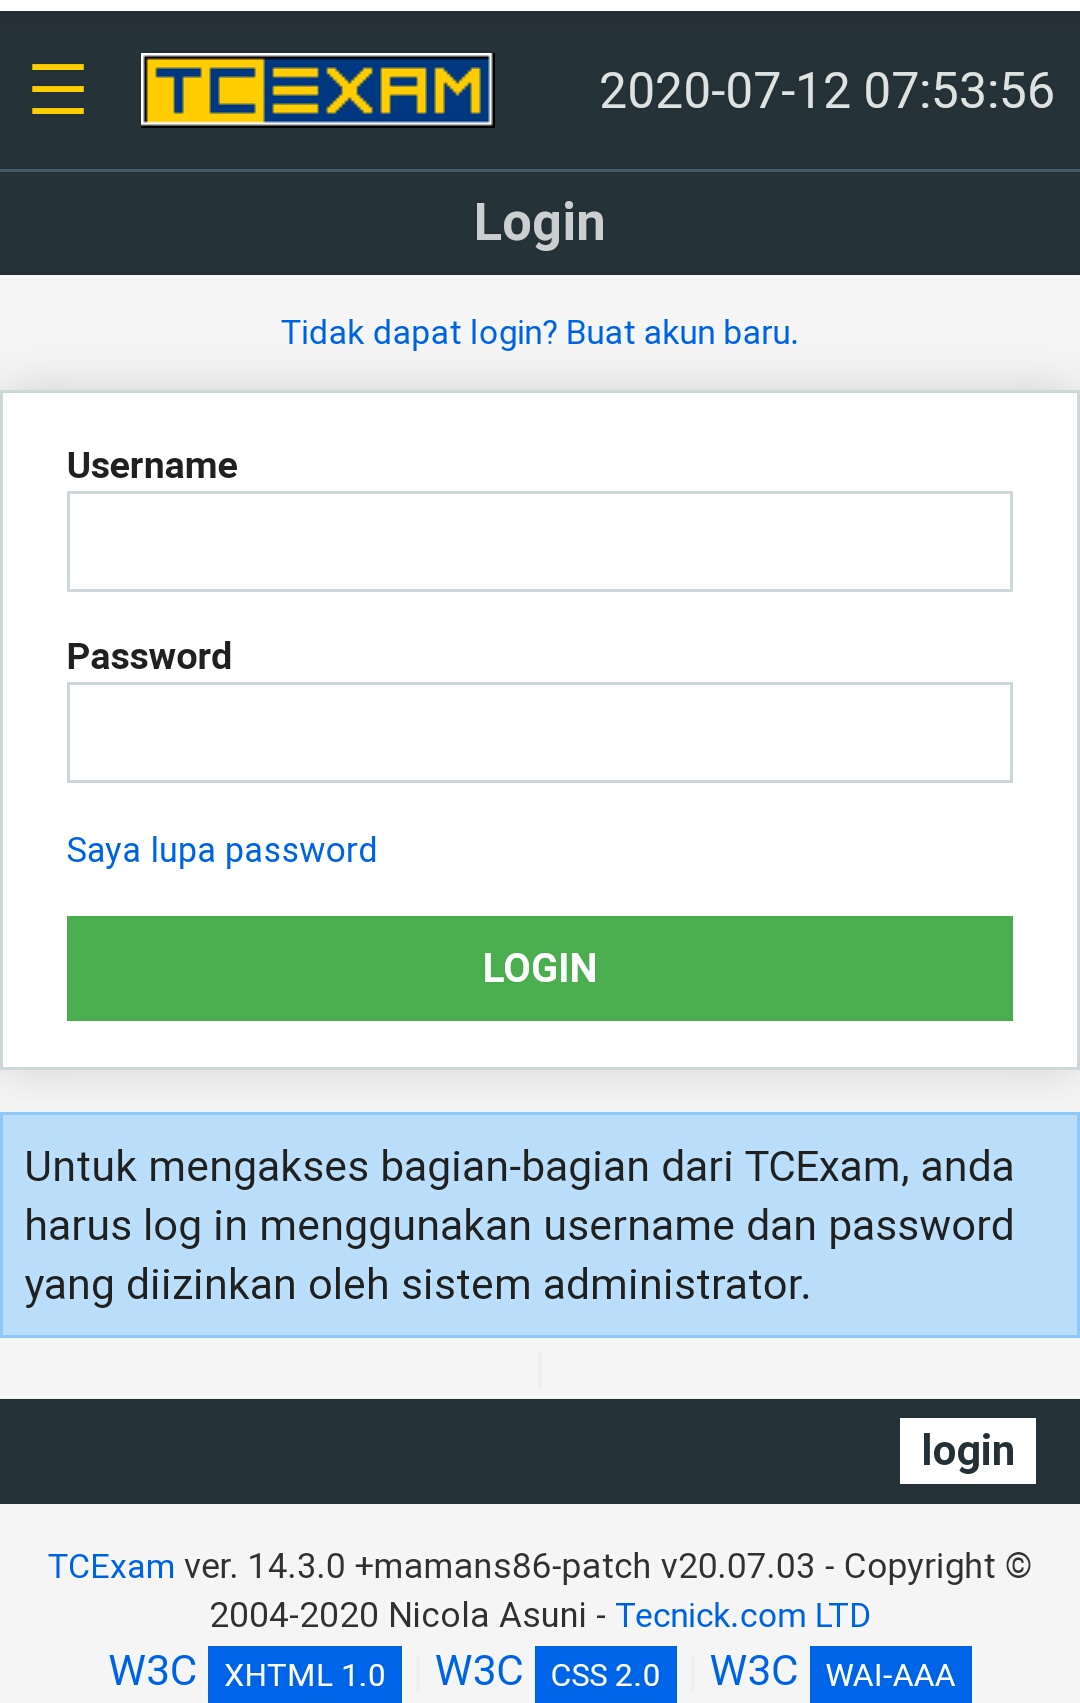 Login Page - Mobile View